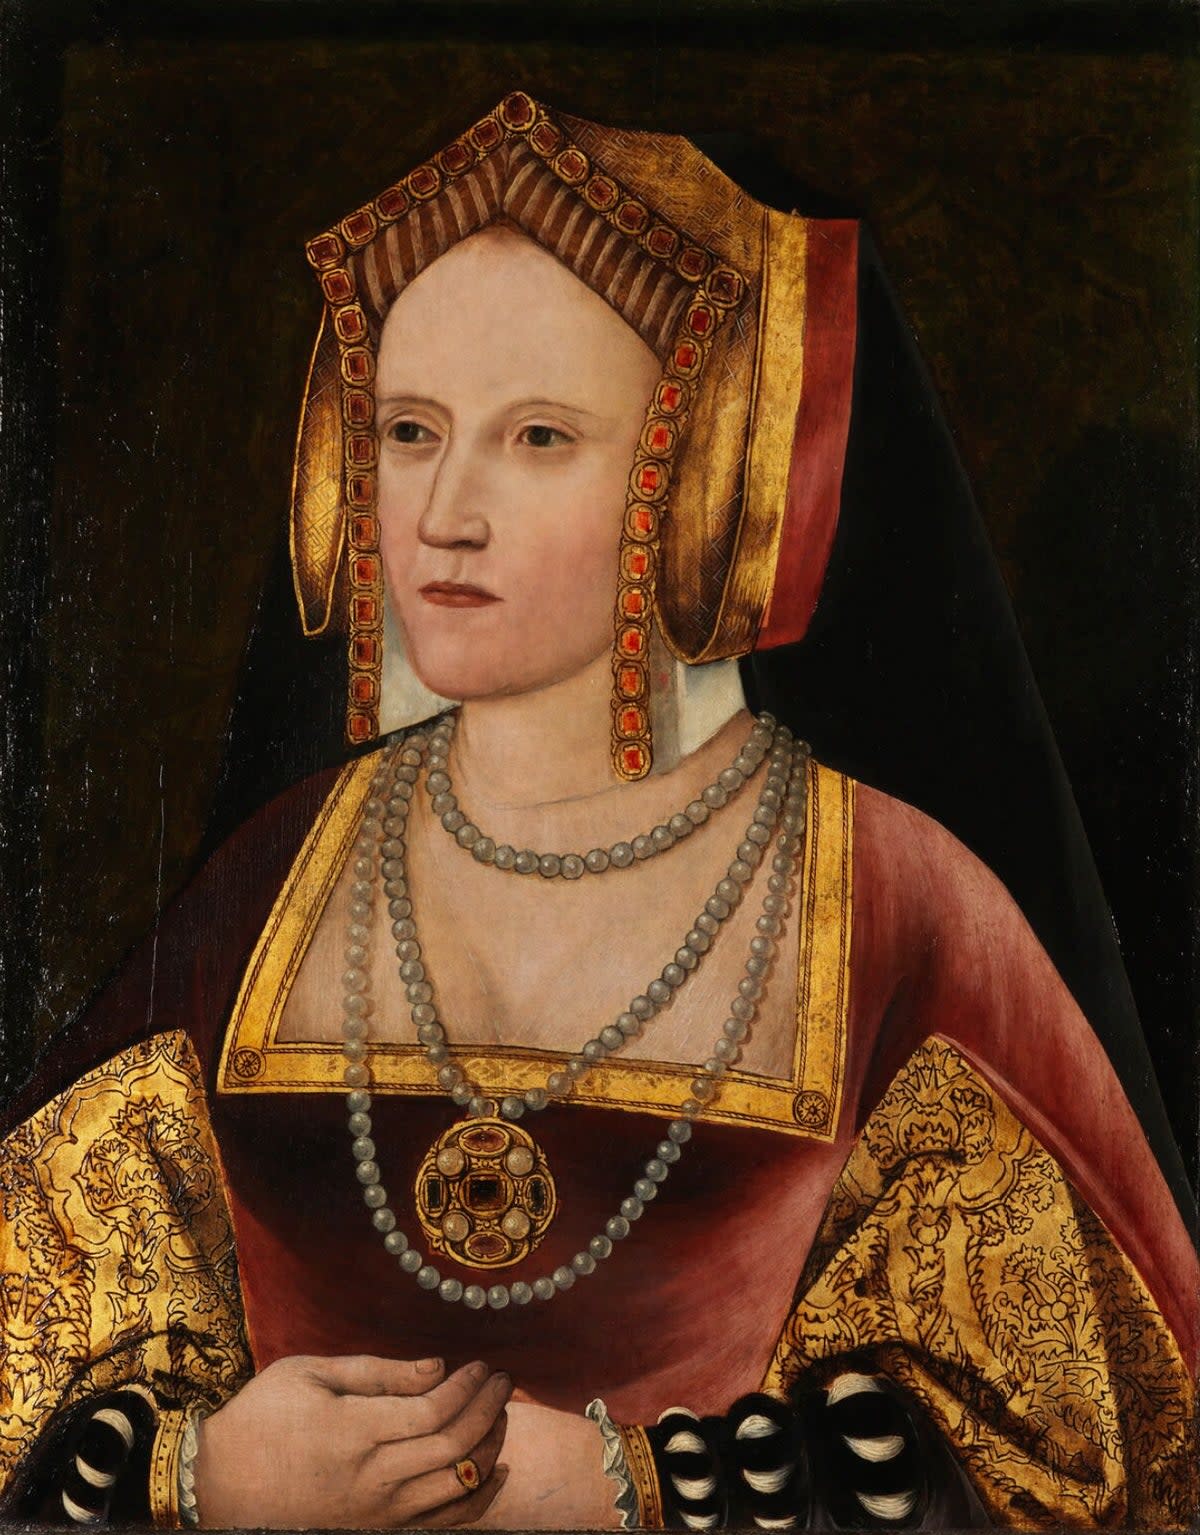 Katherine of Aragon circa 1520, artist unknown (Church Commissioners for England/Public domain)